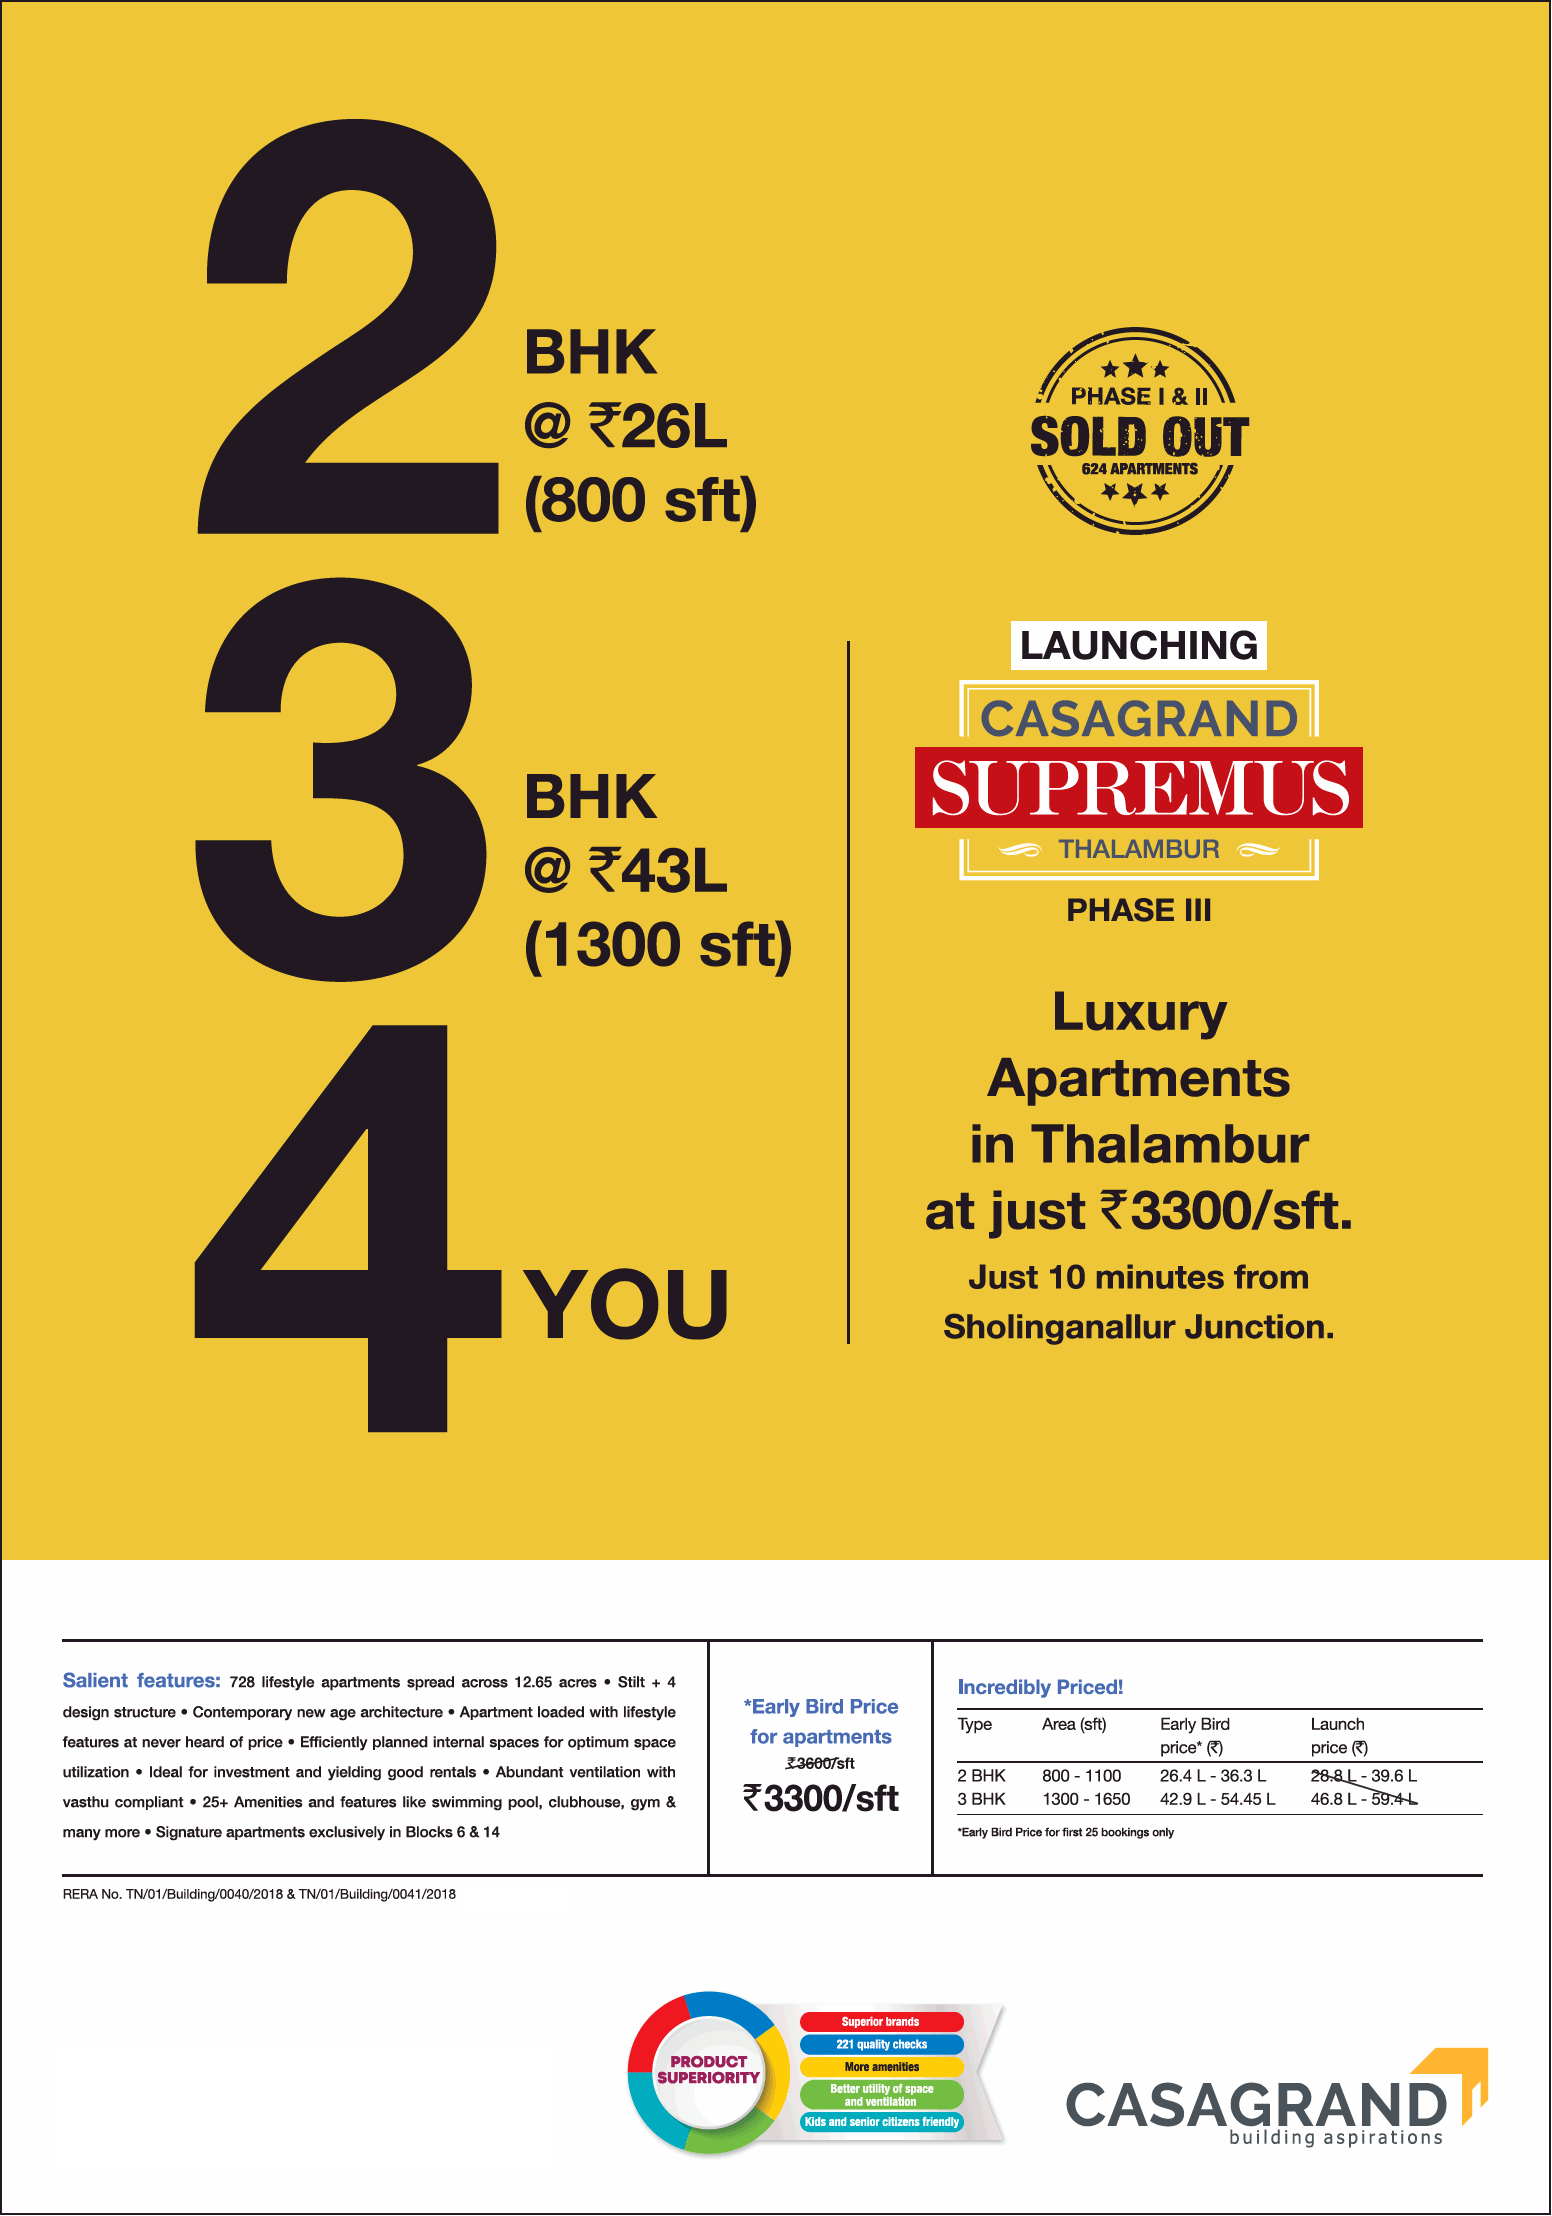 Launching phase 3 with luxury apartments at Casagrand Supremus in Chennai Update